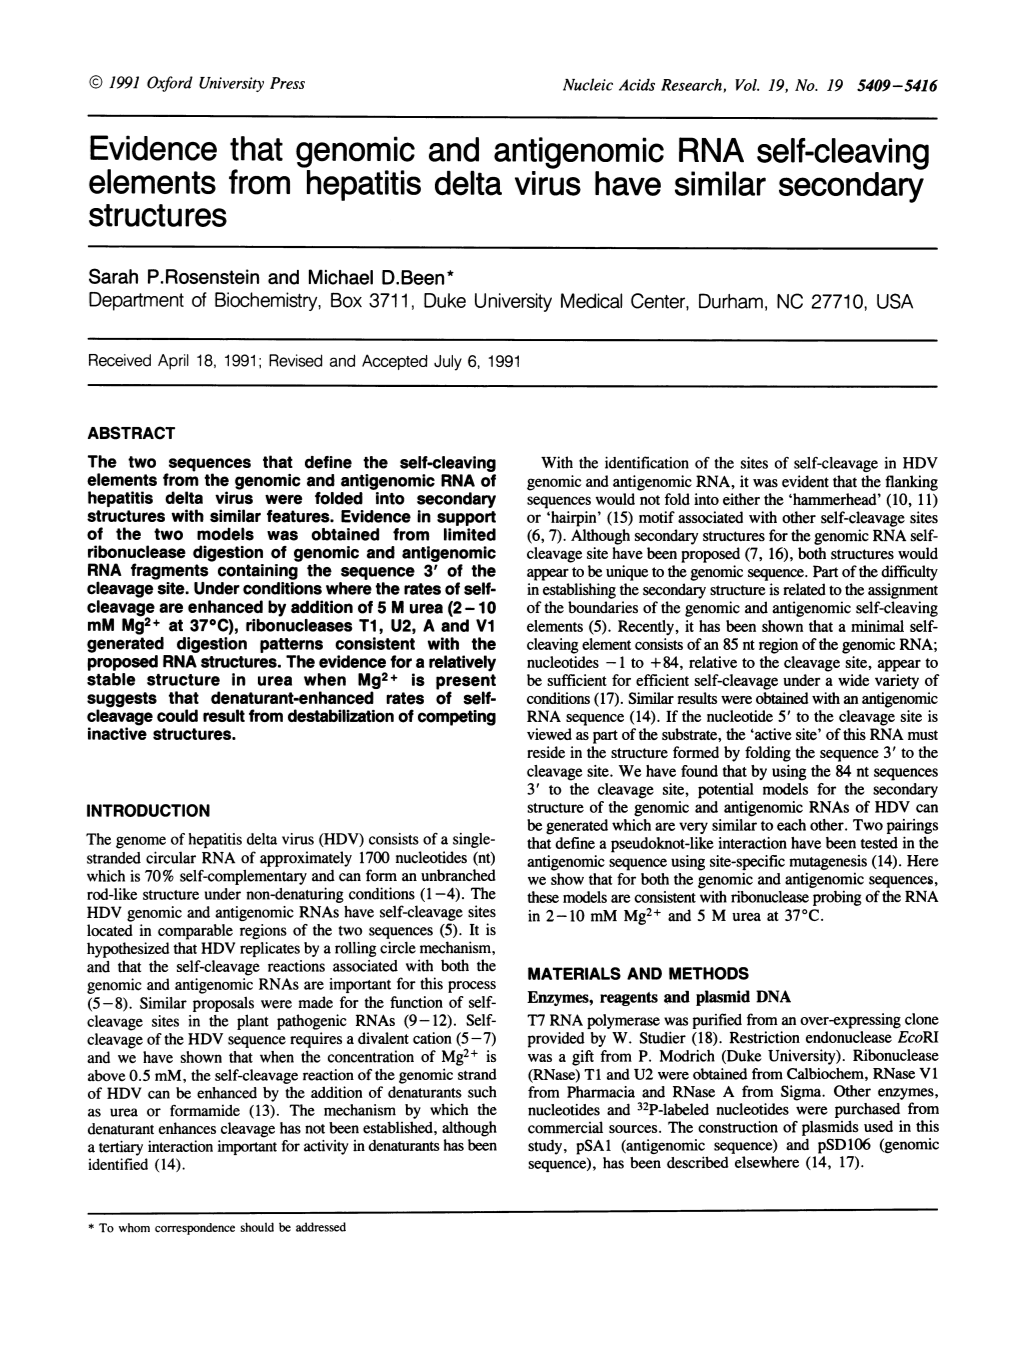 Evidence That Genomic and Antigenomic RNA Self-Cleaving Elements from Hepatitis Delta Virus Have Similar Secondary Structures